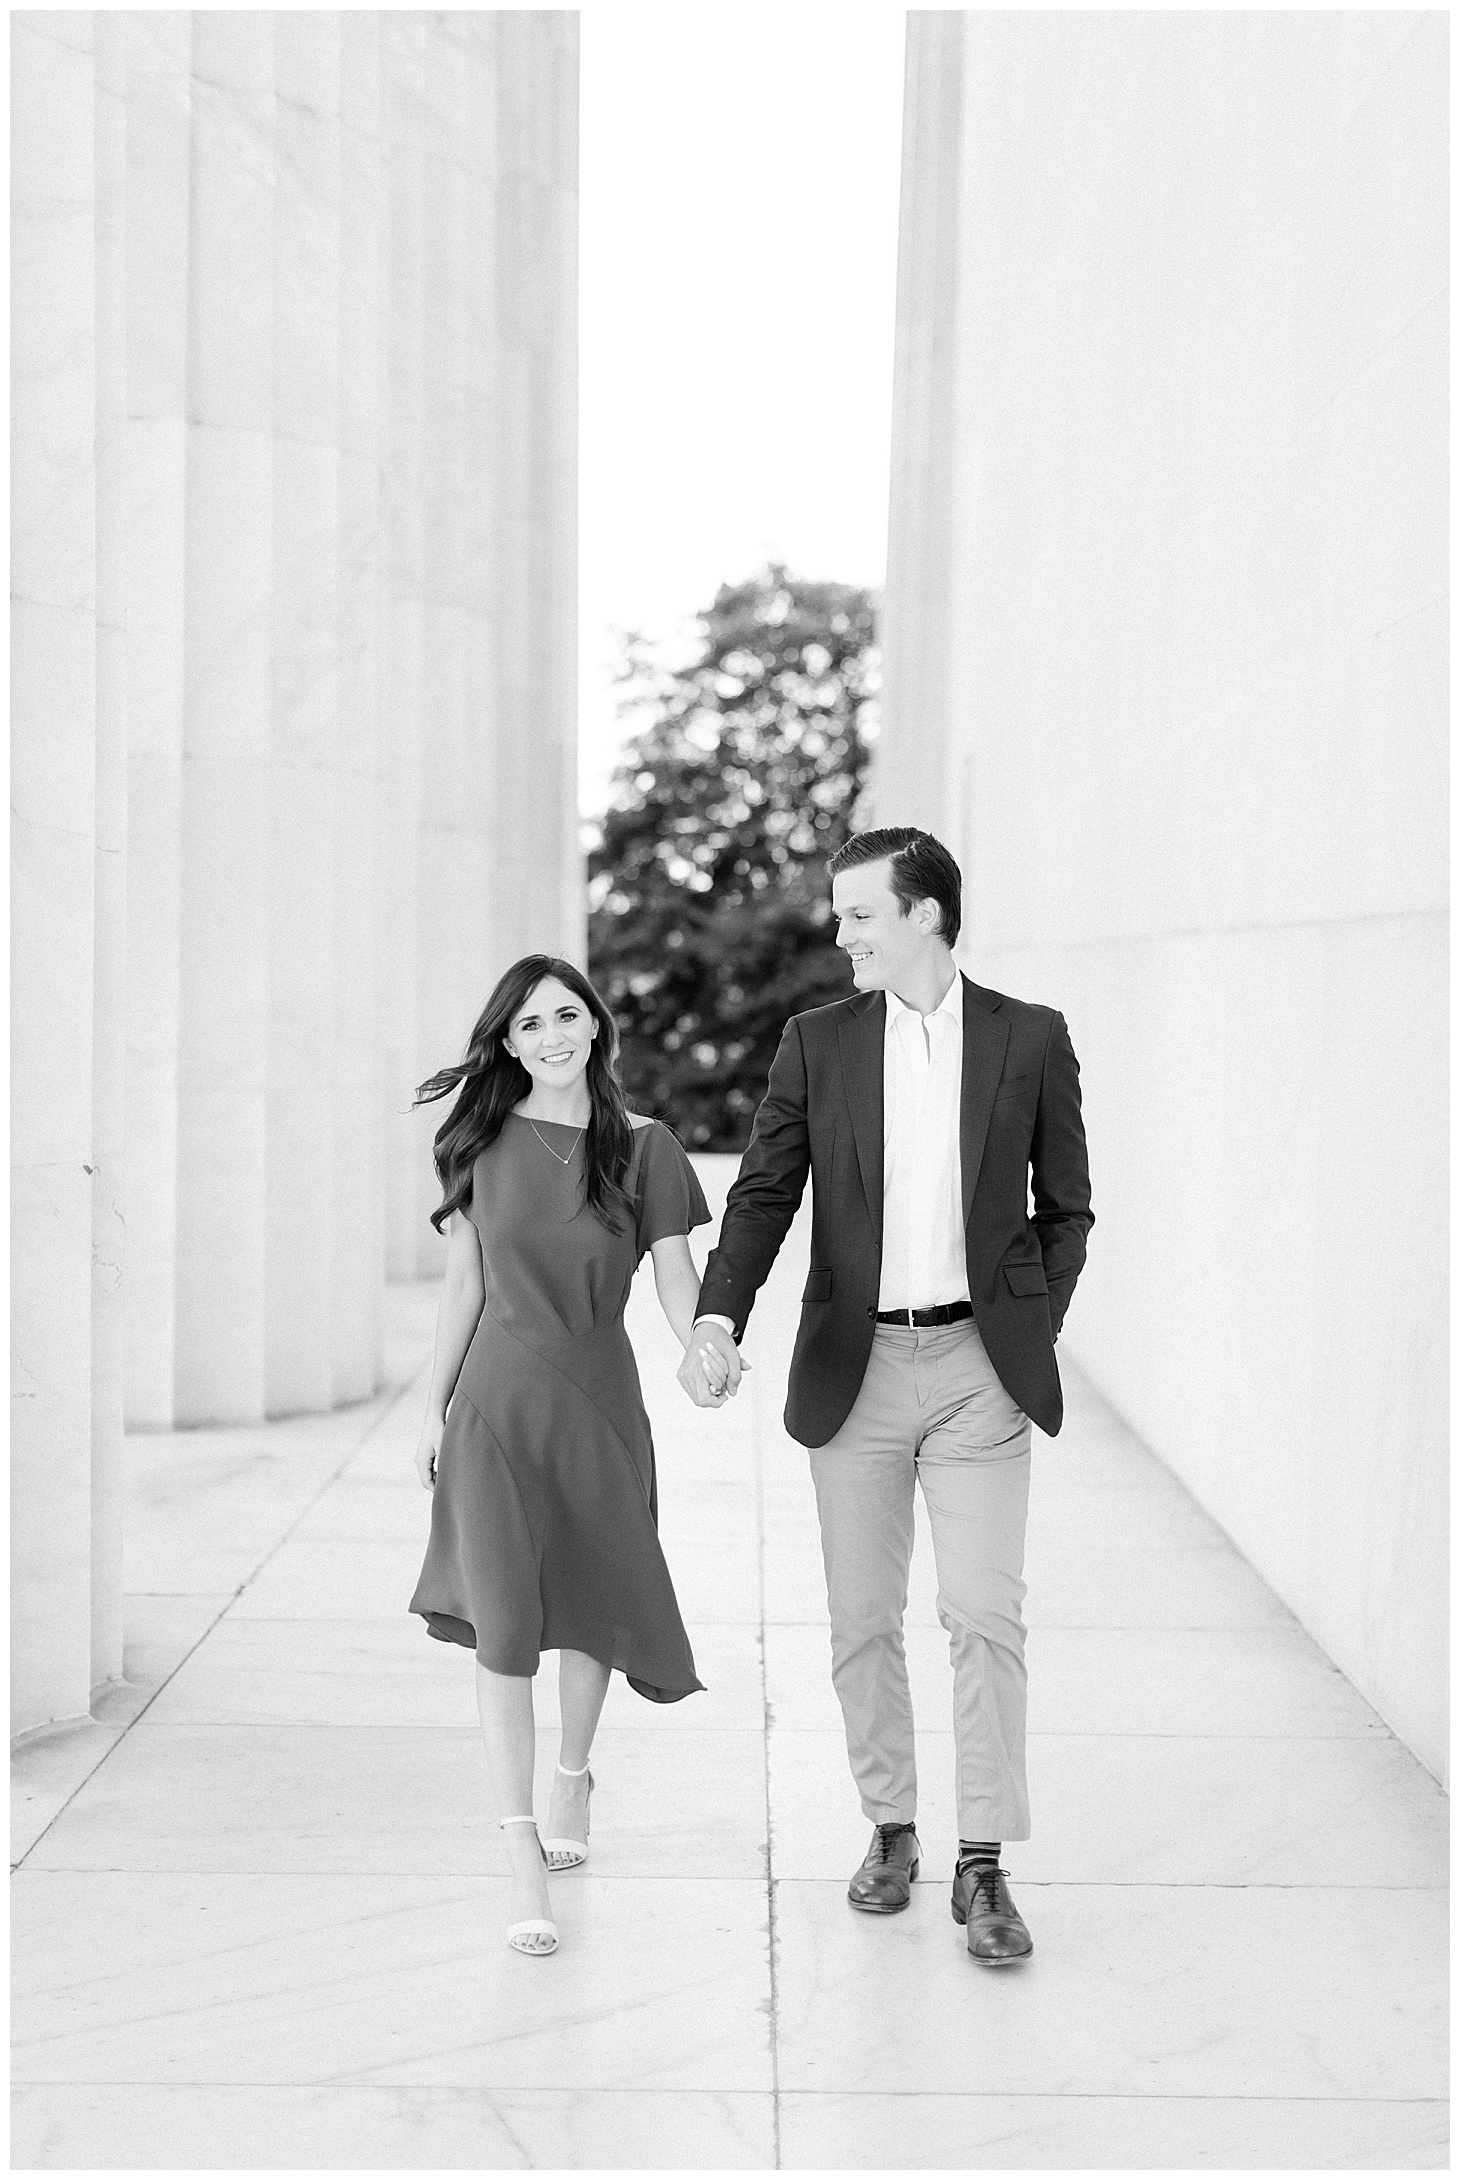  Portraits at Lincoln Memorial, Sarah Bradshaw Photography, Preppy Morning Engagement Session with Golden Light and Golden Retriever